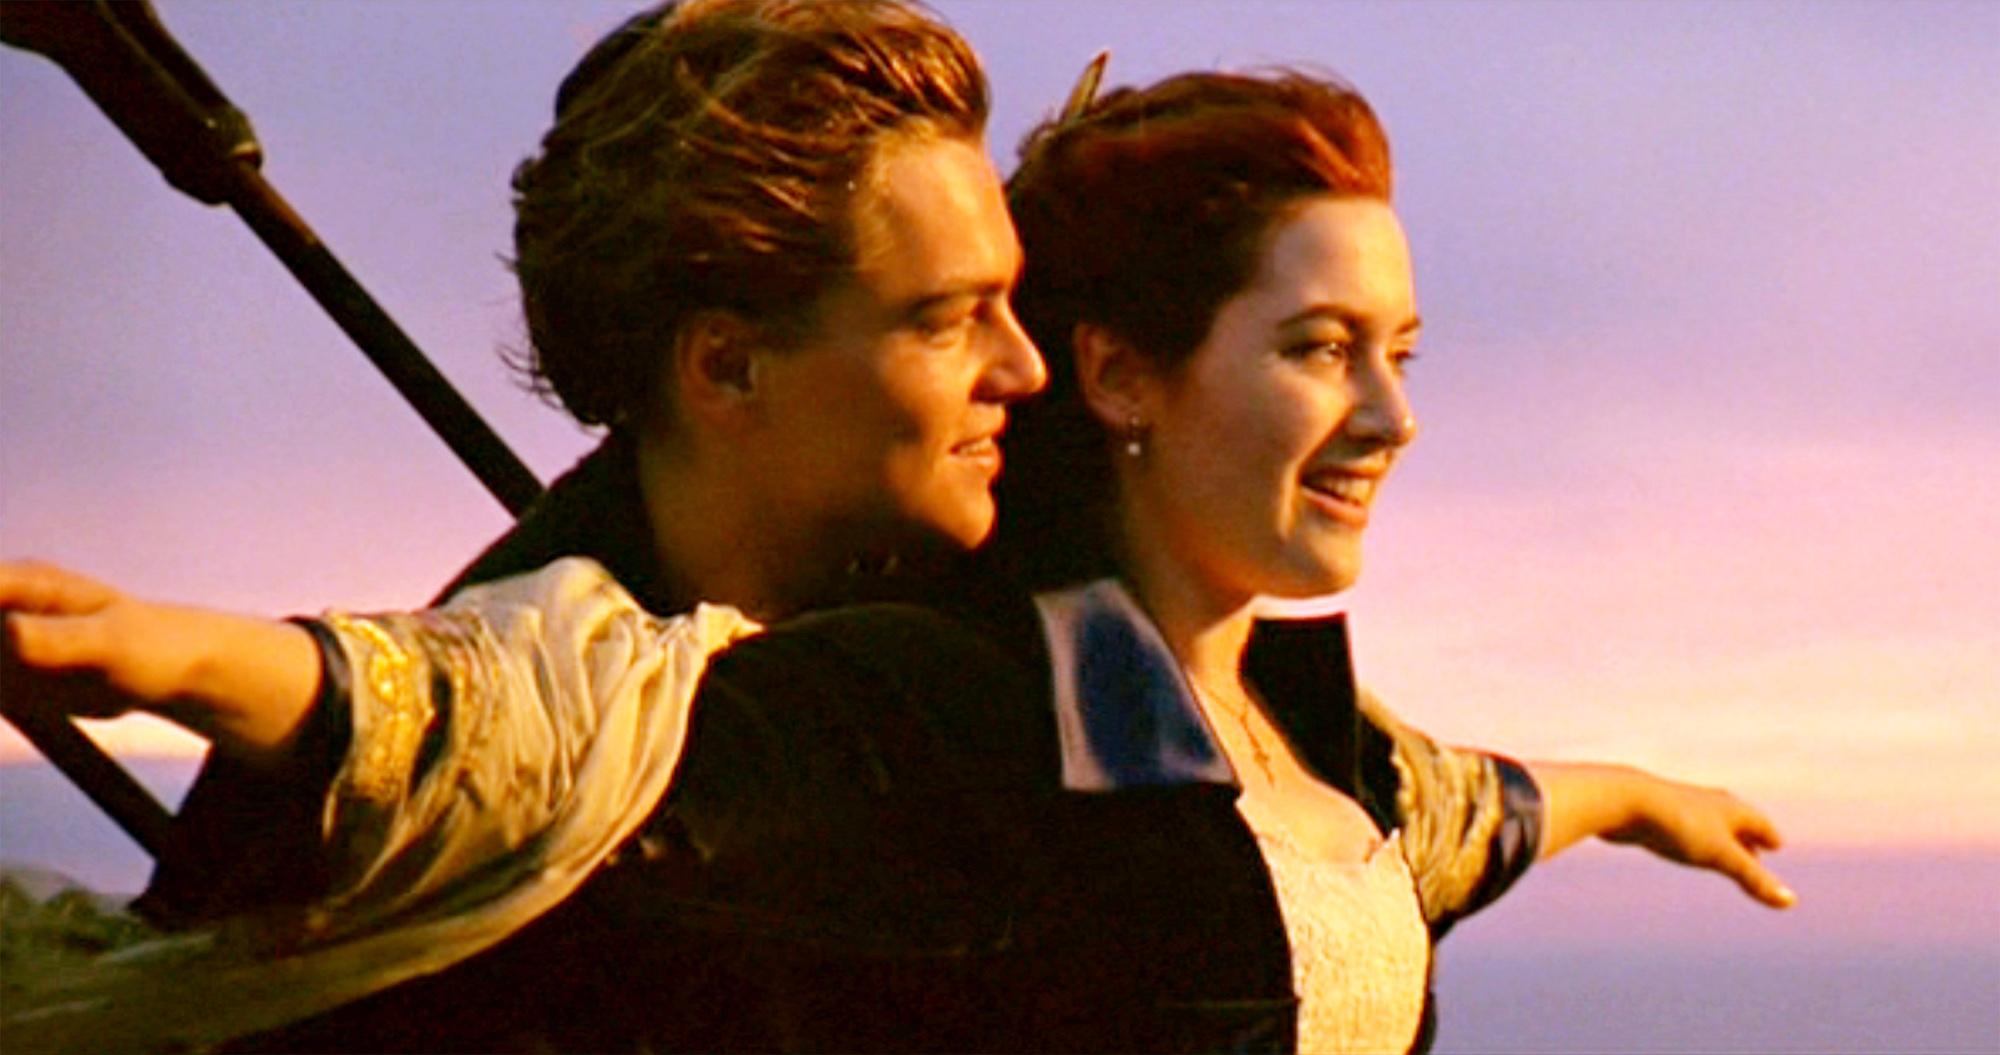 Jack Dawson (Leonardo DiCaprio) and Rose (Kate Winslet) in one of the most iconic scenes from the movie 'Titanic,' written and directed by James Cameron.